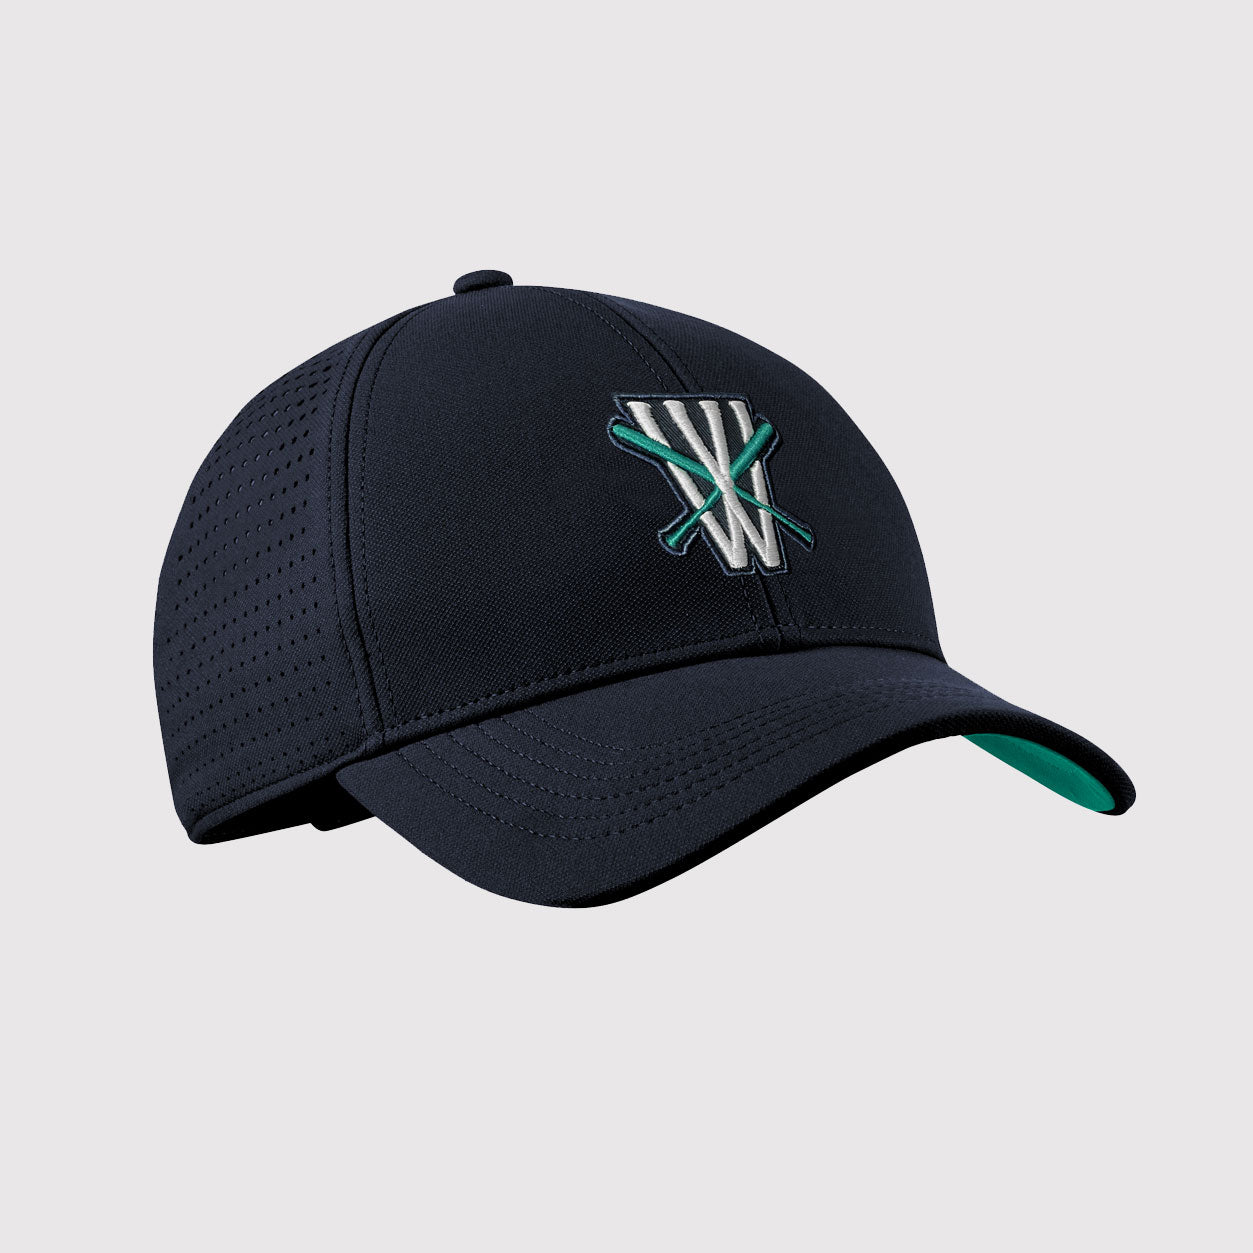 CASQUETTES WHACKS NAVY